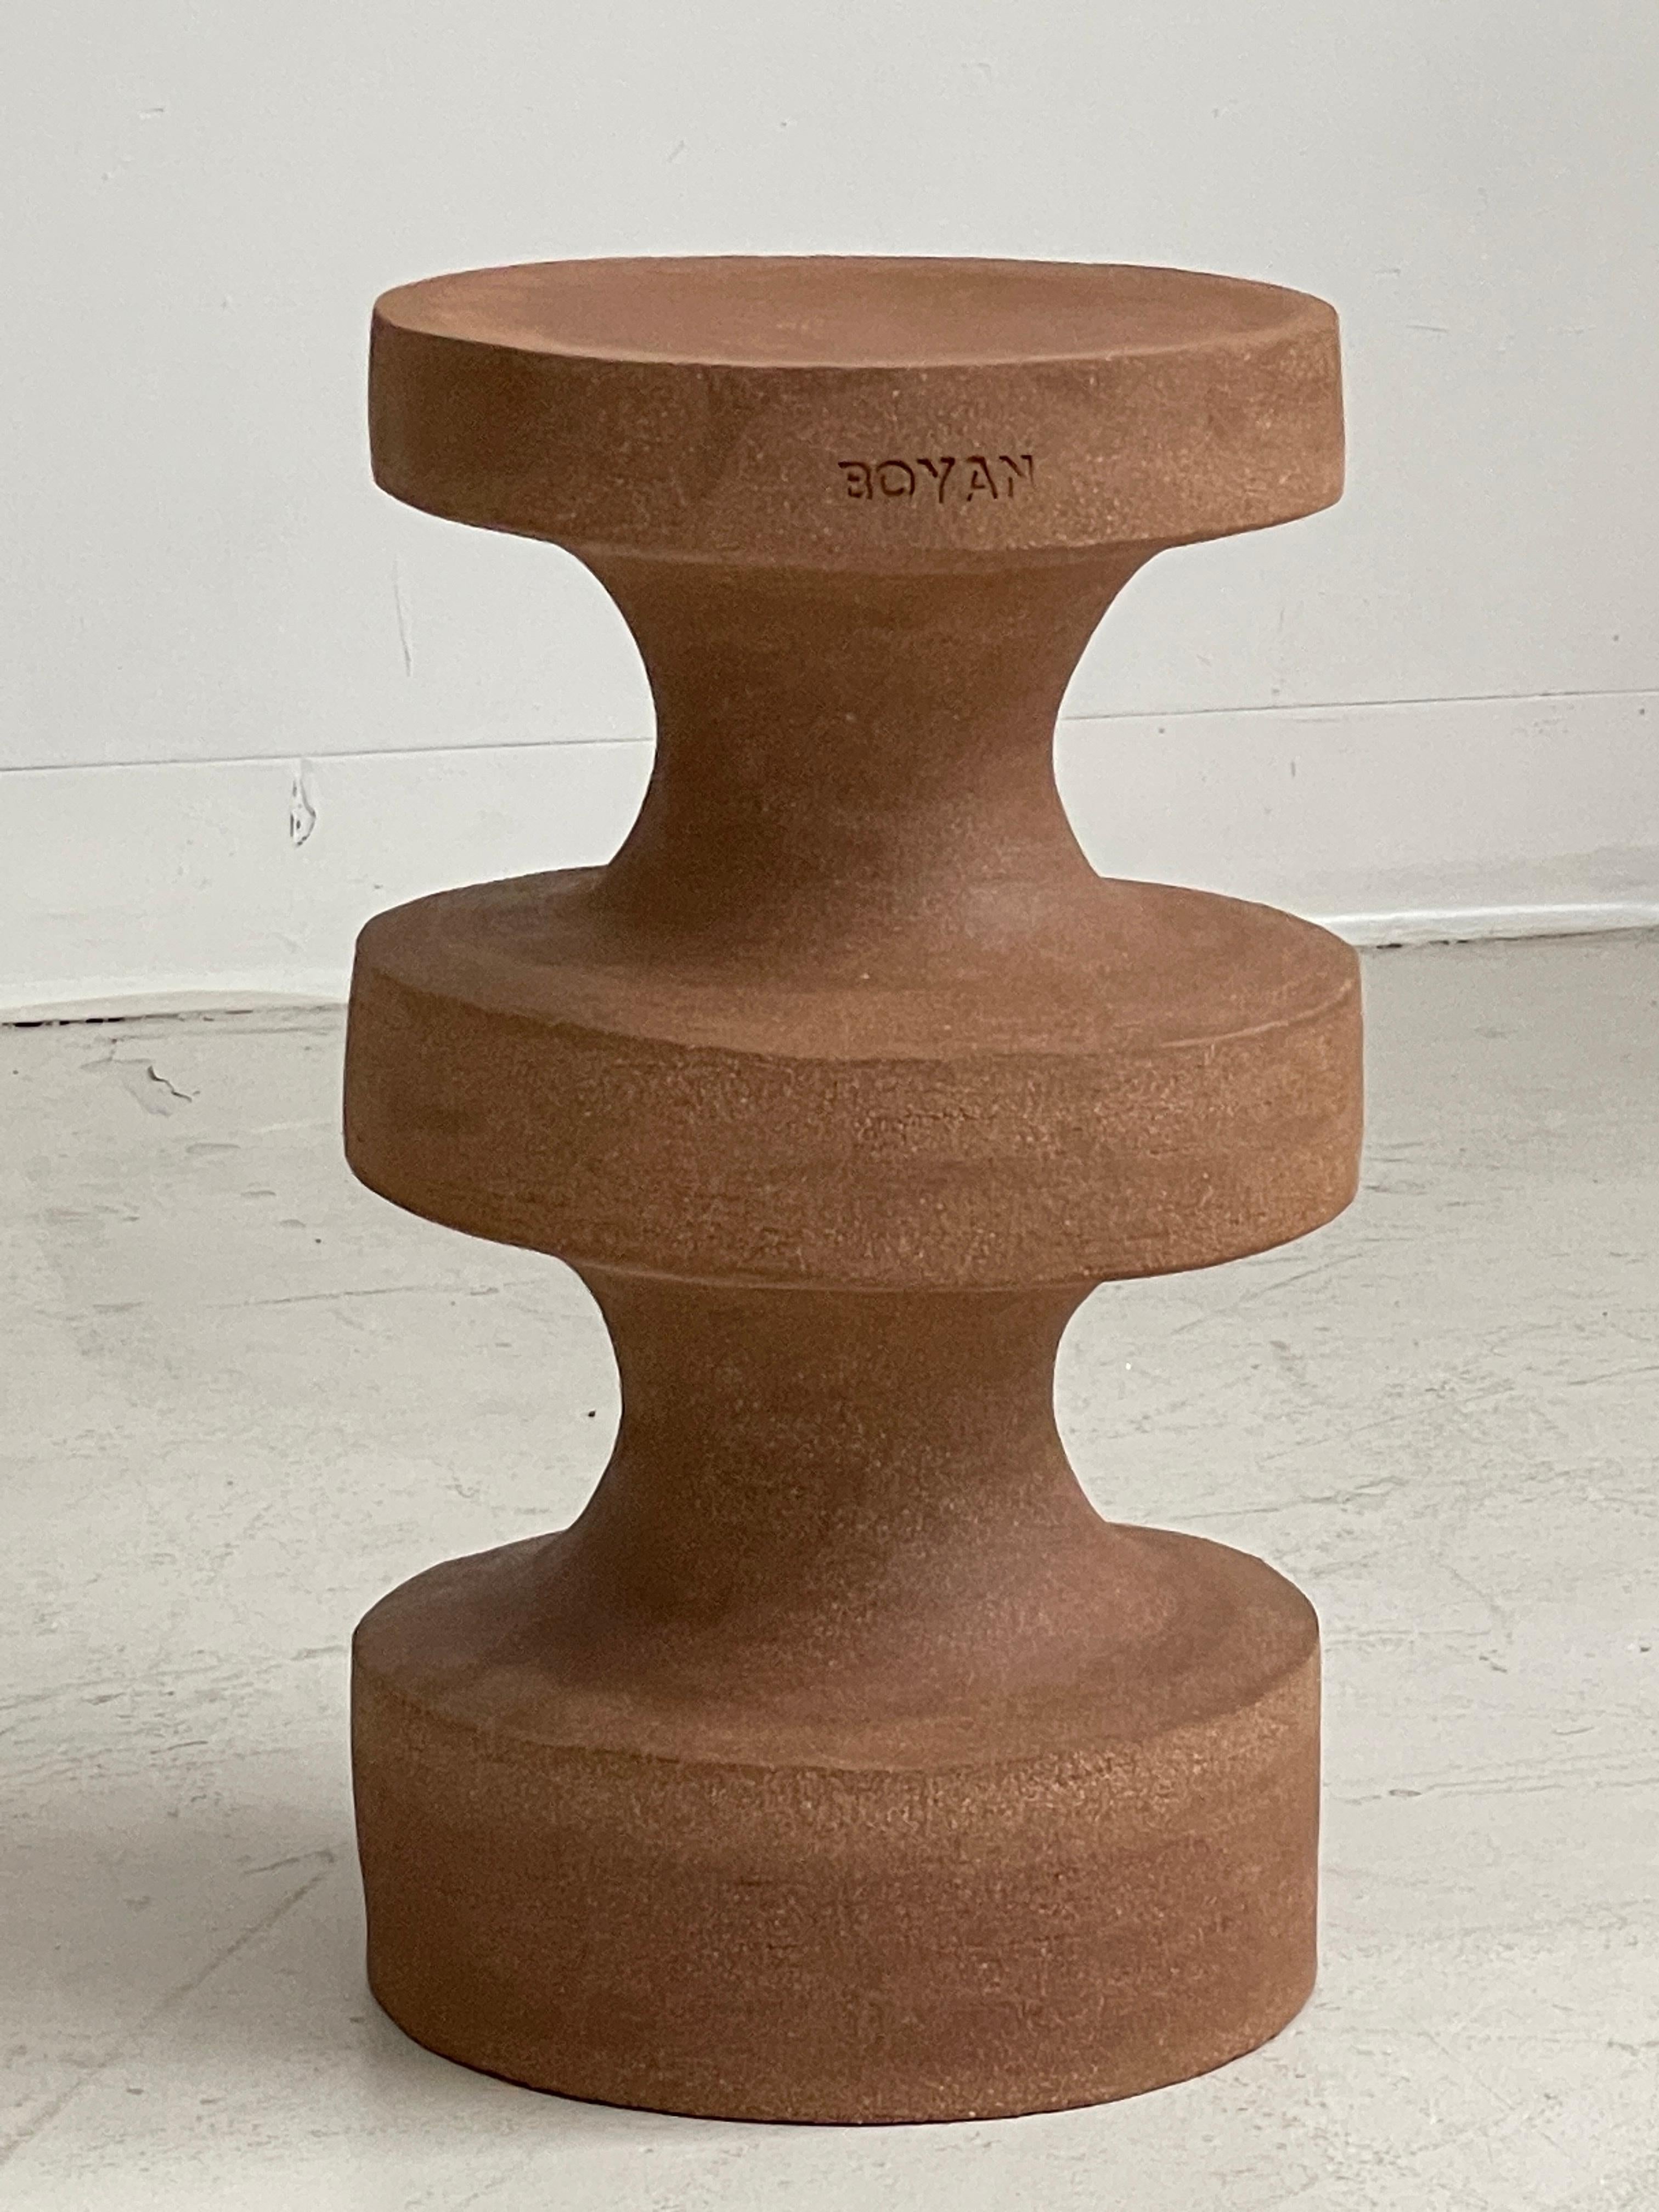 The Boyan side table by Zeynep Boyan
Dimensions: D 25.4 x H 43.18 cm
Materials: Terracotta stoneware clay.
This item is handmade. Due to the nature of the medium and human touch, slight variations are expected. 

The Boyan side table I is an